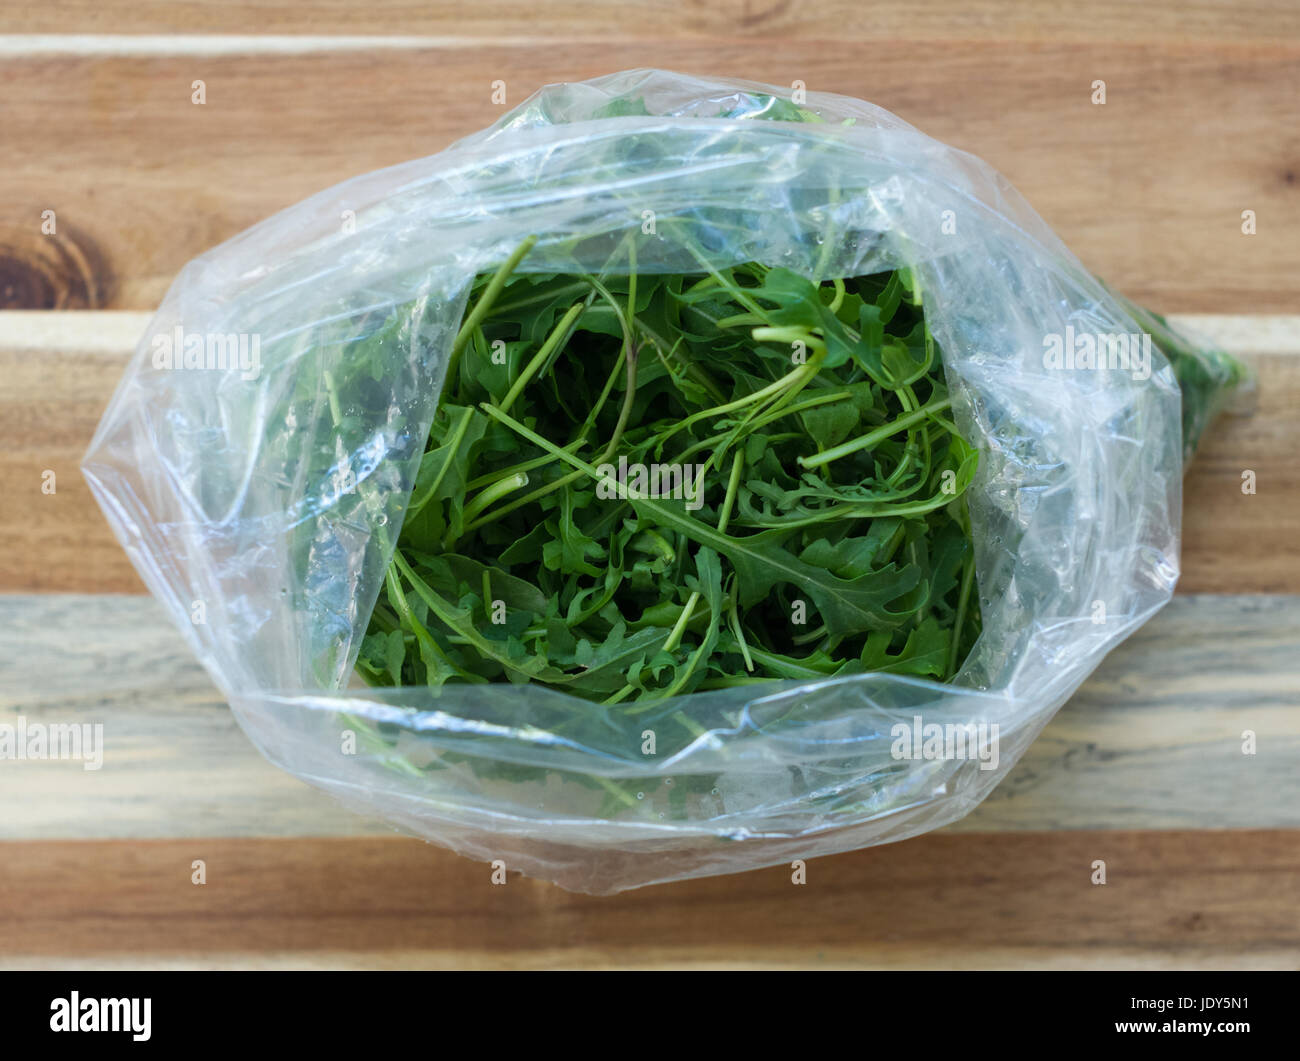 A large plastic bag filled with arugula (rocket) on a wooden chopping board Stock Photo